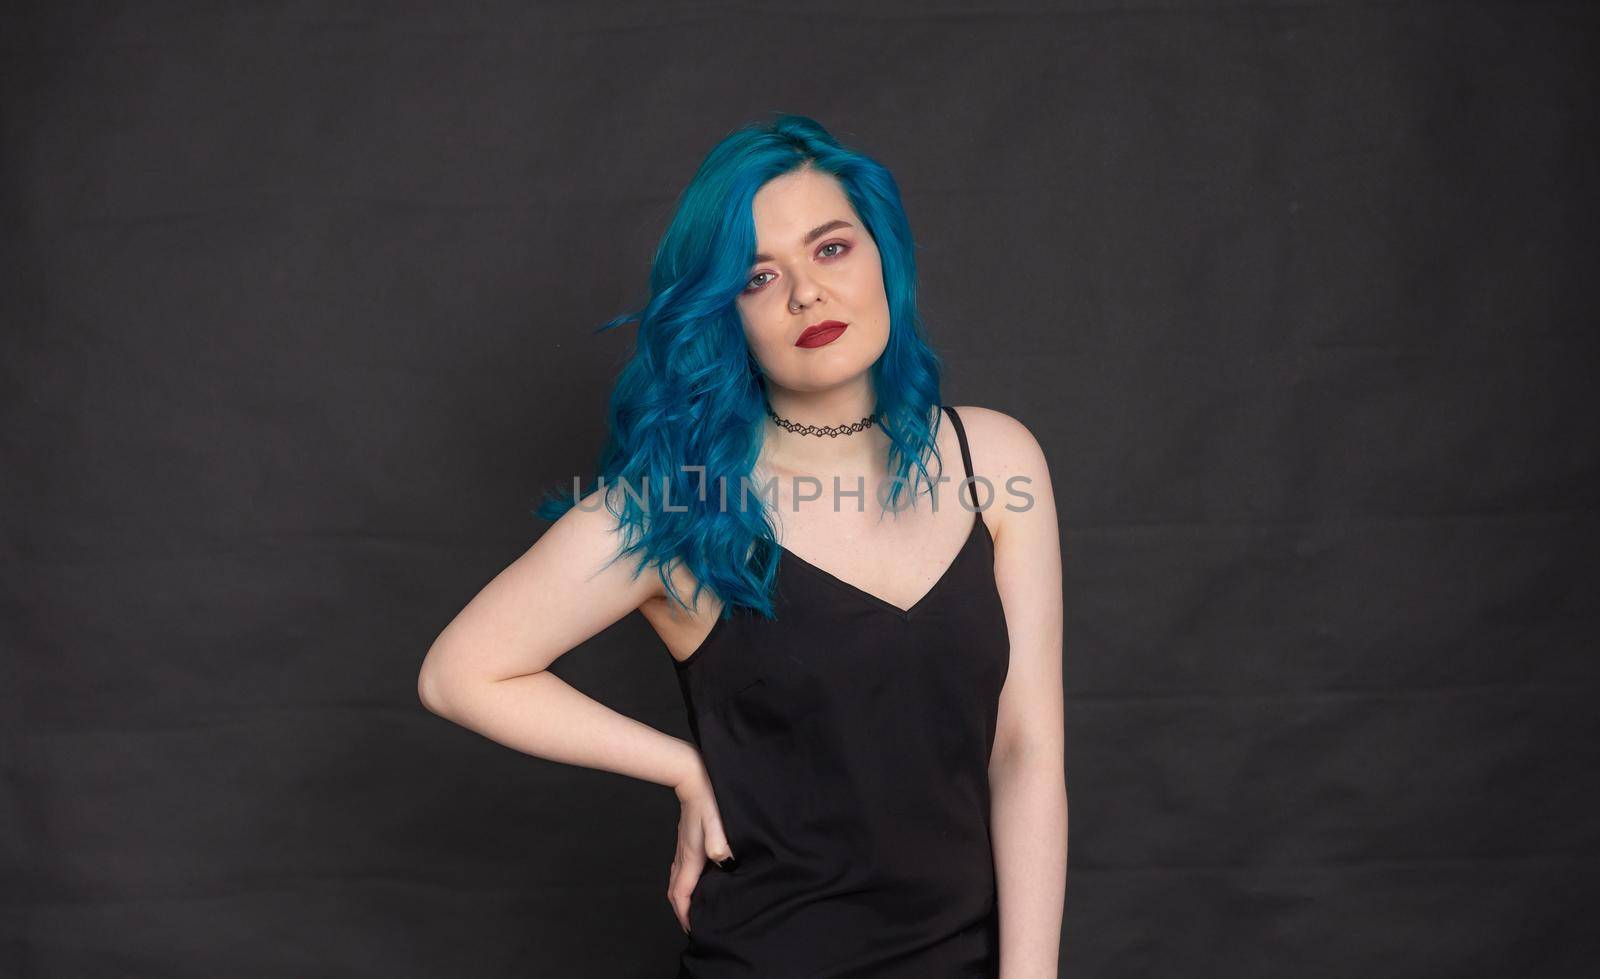 People and fashion concept - Woman dressed in black dress and blue hair posing over black background.